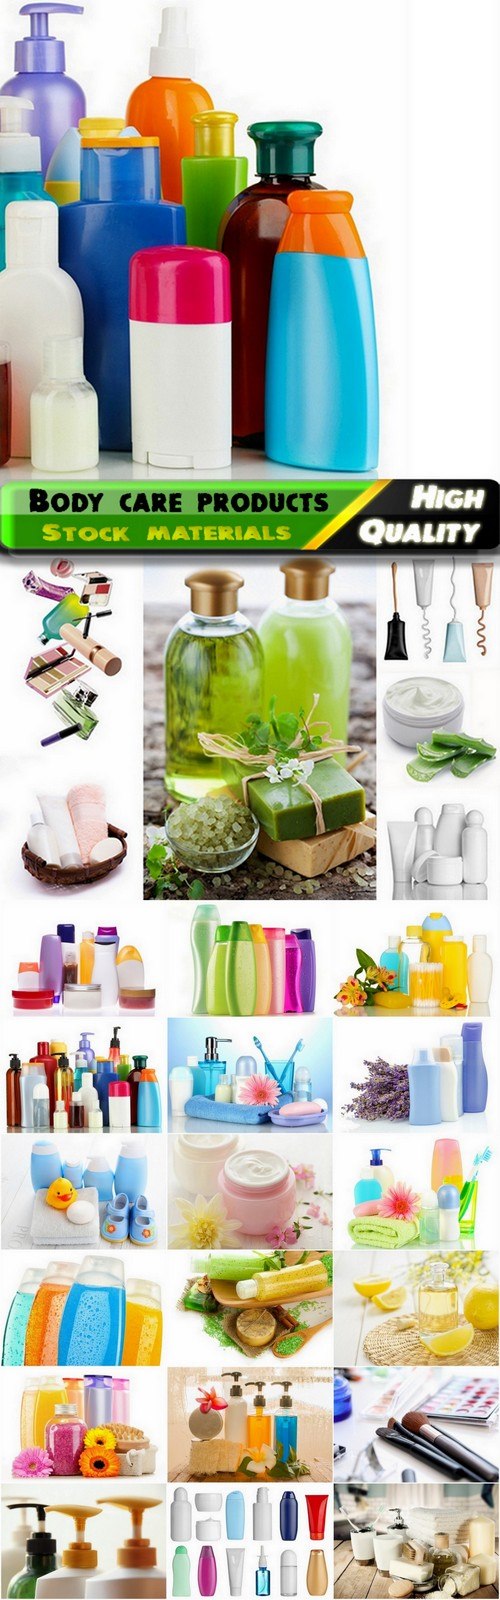 Body care products Stock images - 25 HQ Jpg